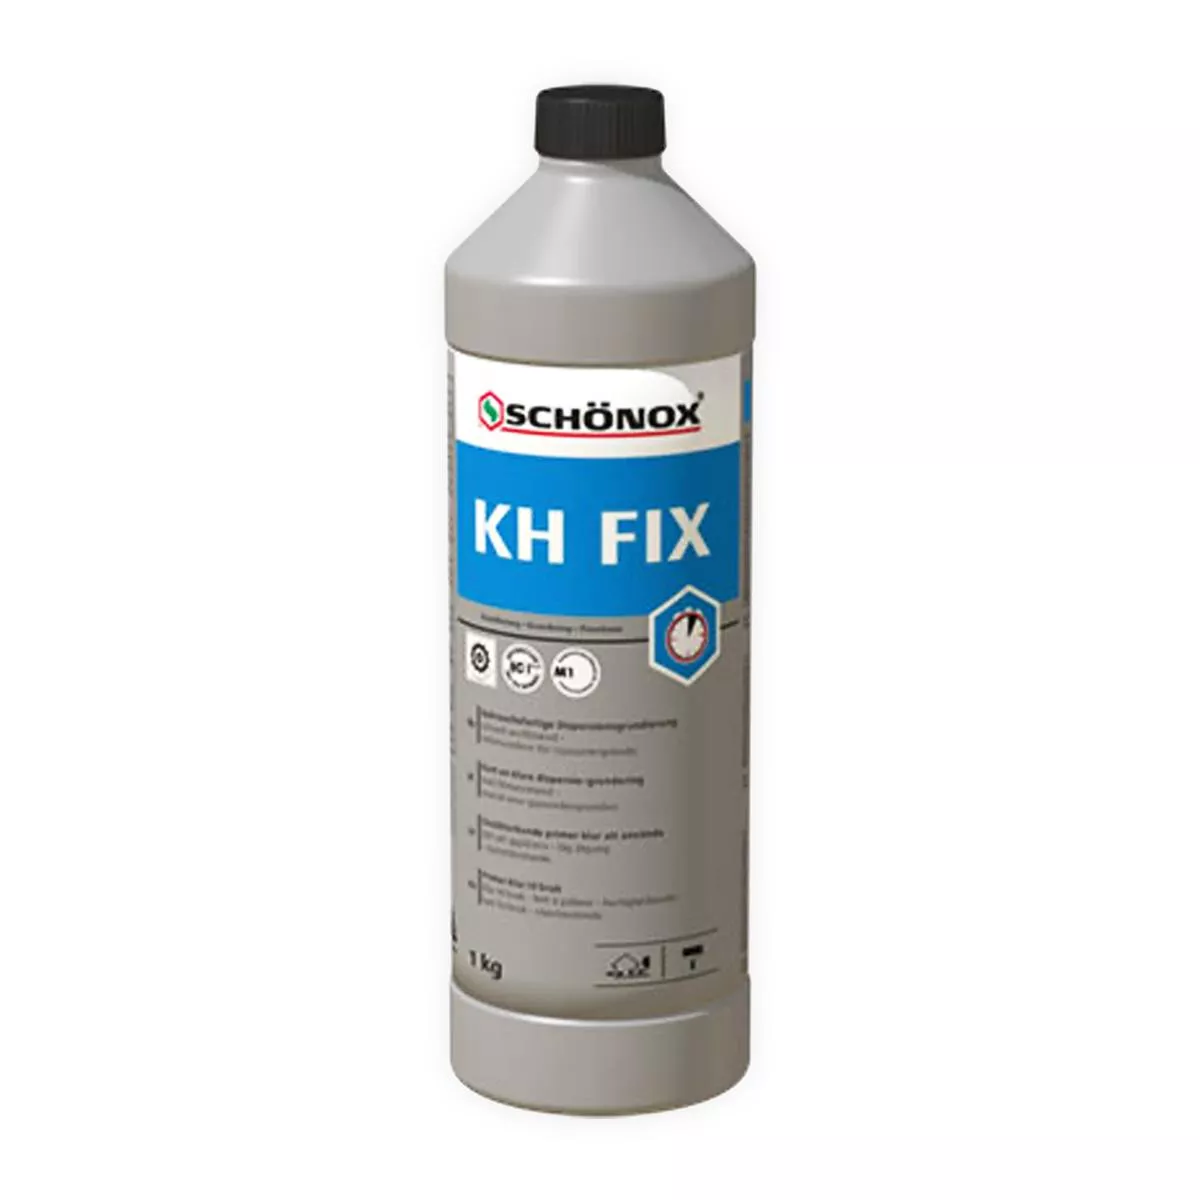 Primer Ready to use Schönox KH FIX synthetic resin adhesive dispersion 1 kg